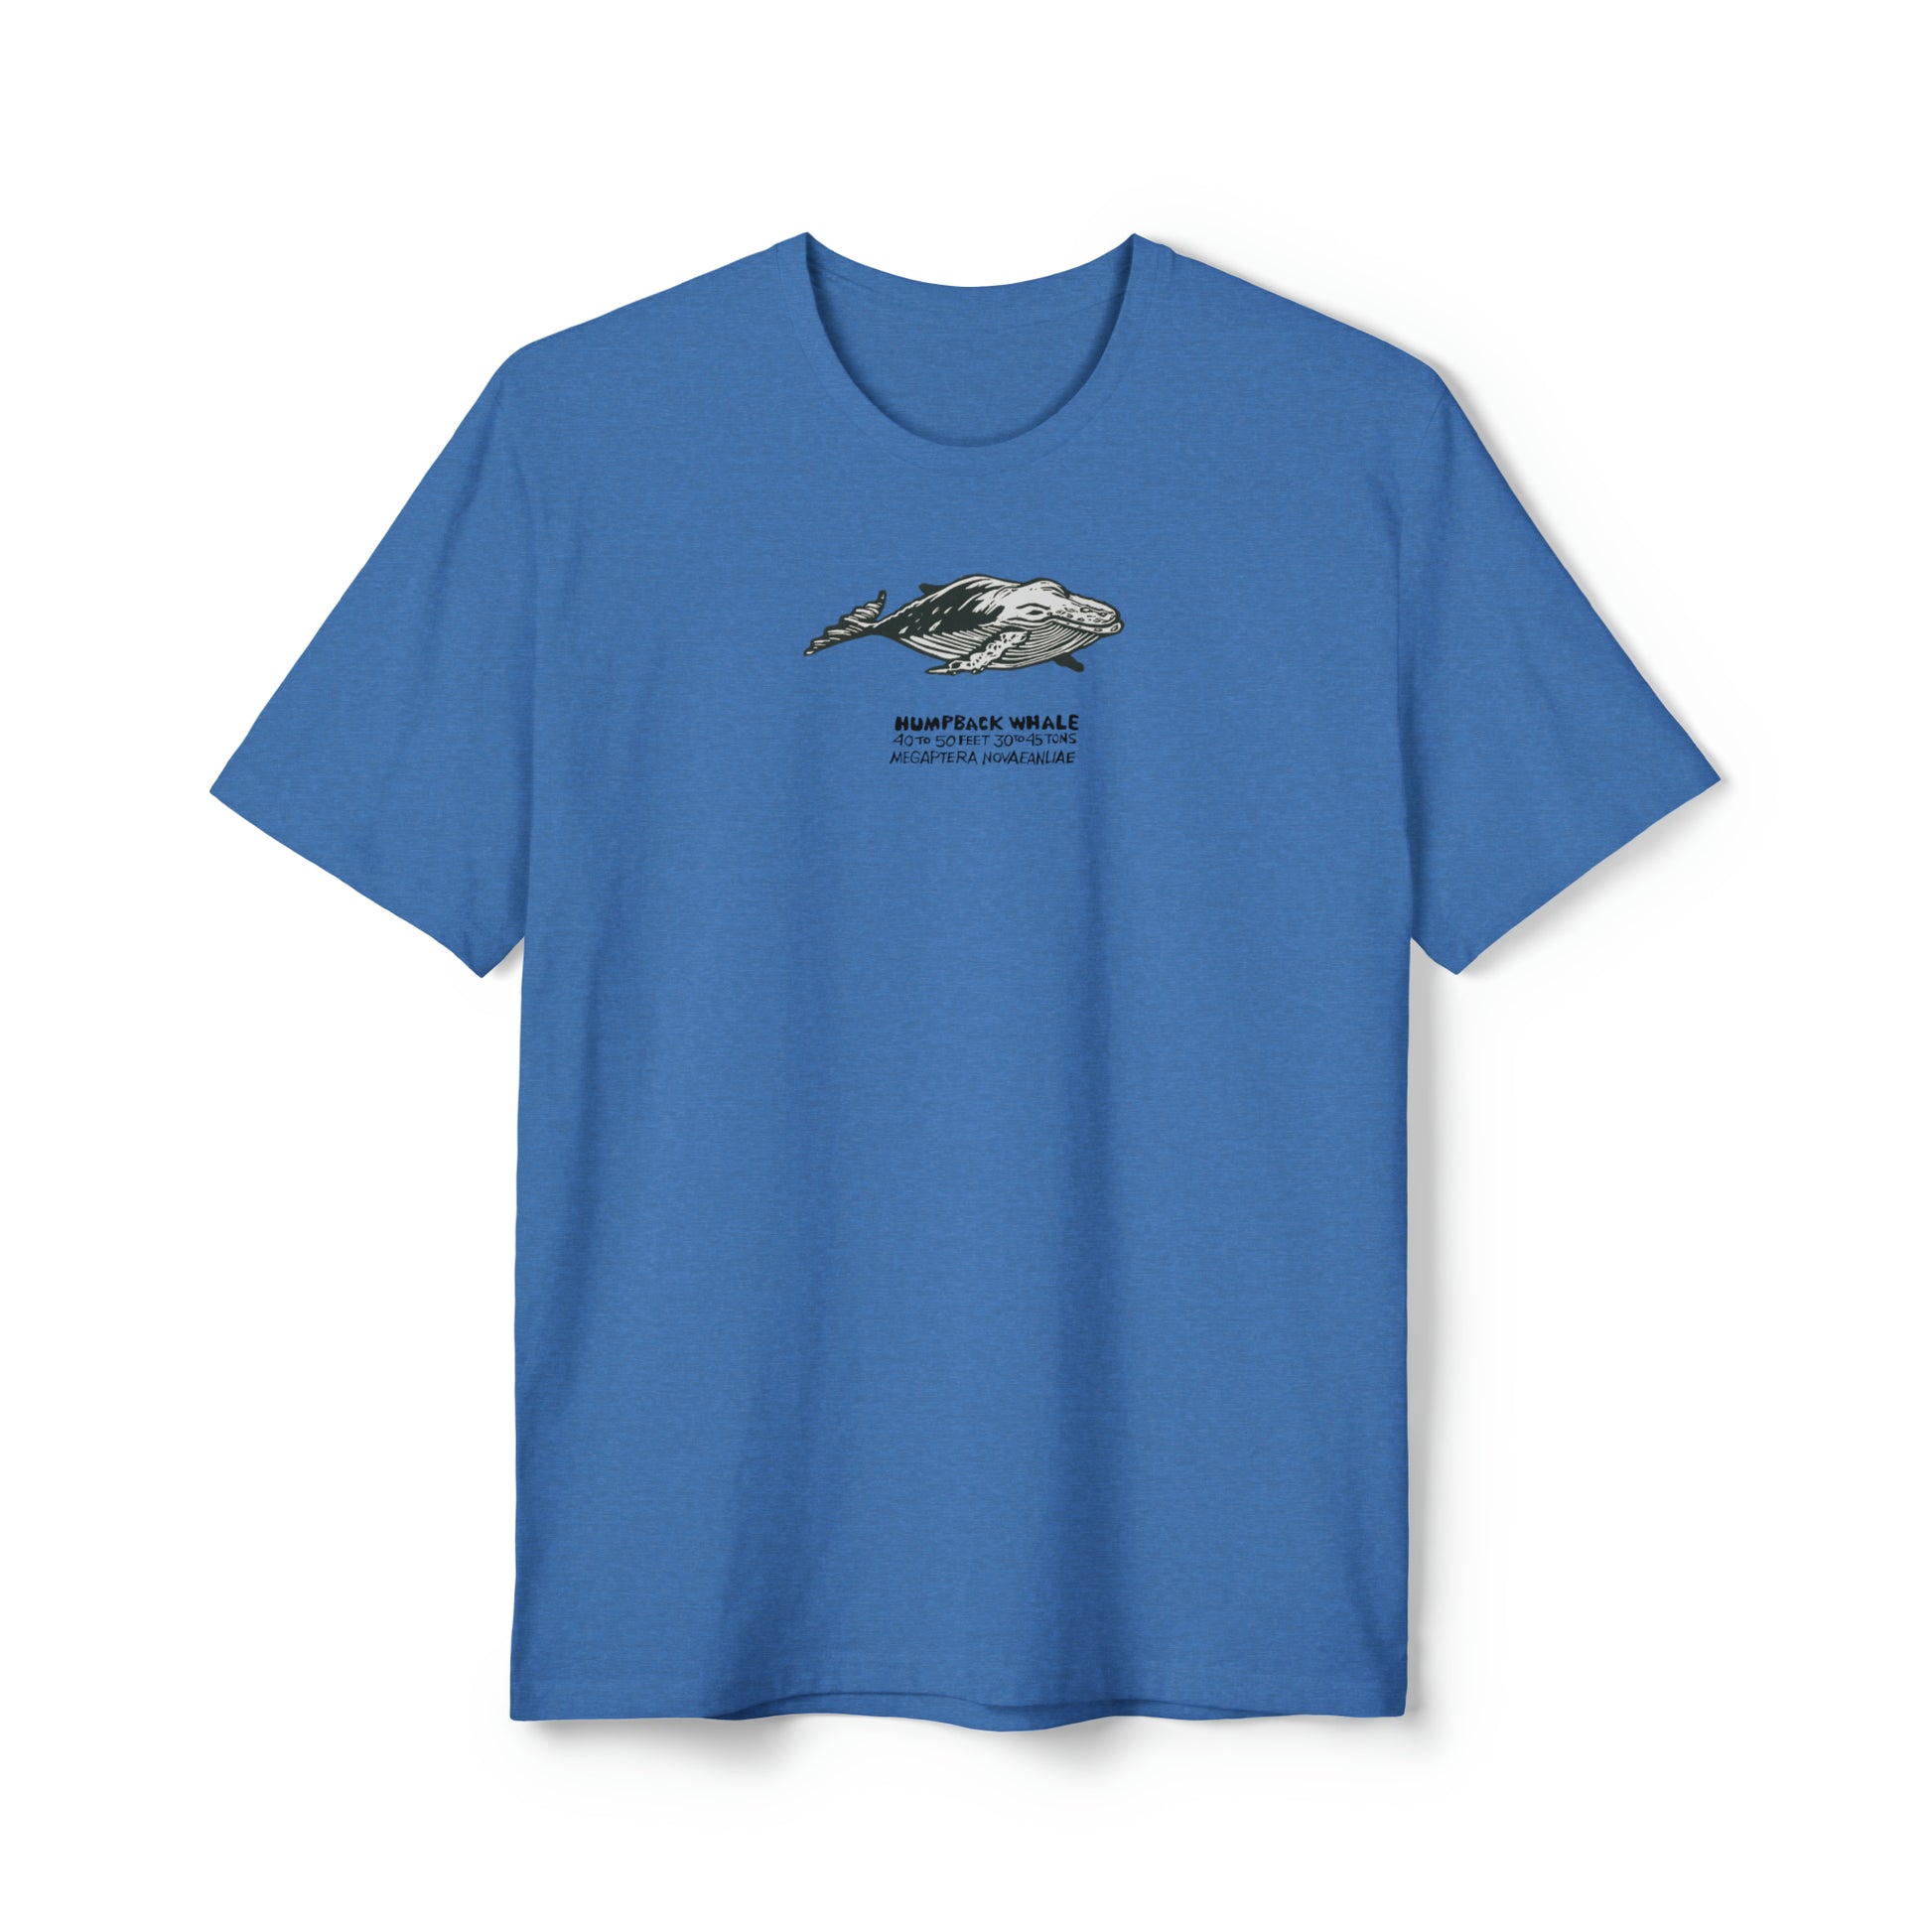 Black, white, and gray Humpback Whale on blue heather color unisex men's t-shirt. Text under image says Humpback Whale plus height weight and Latin name.